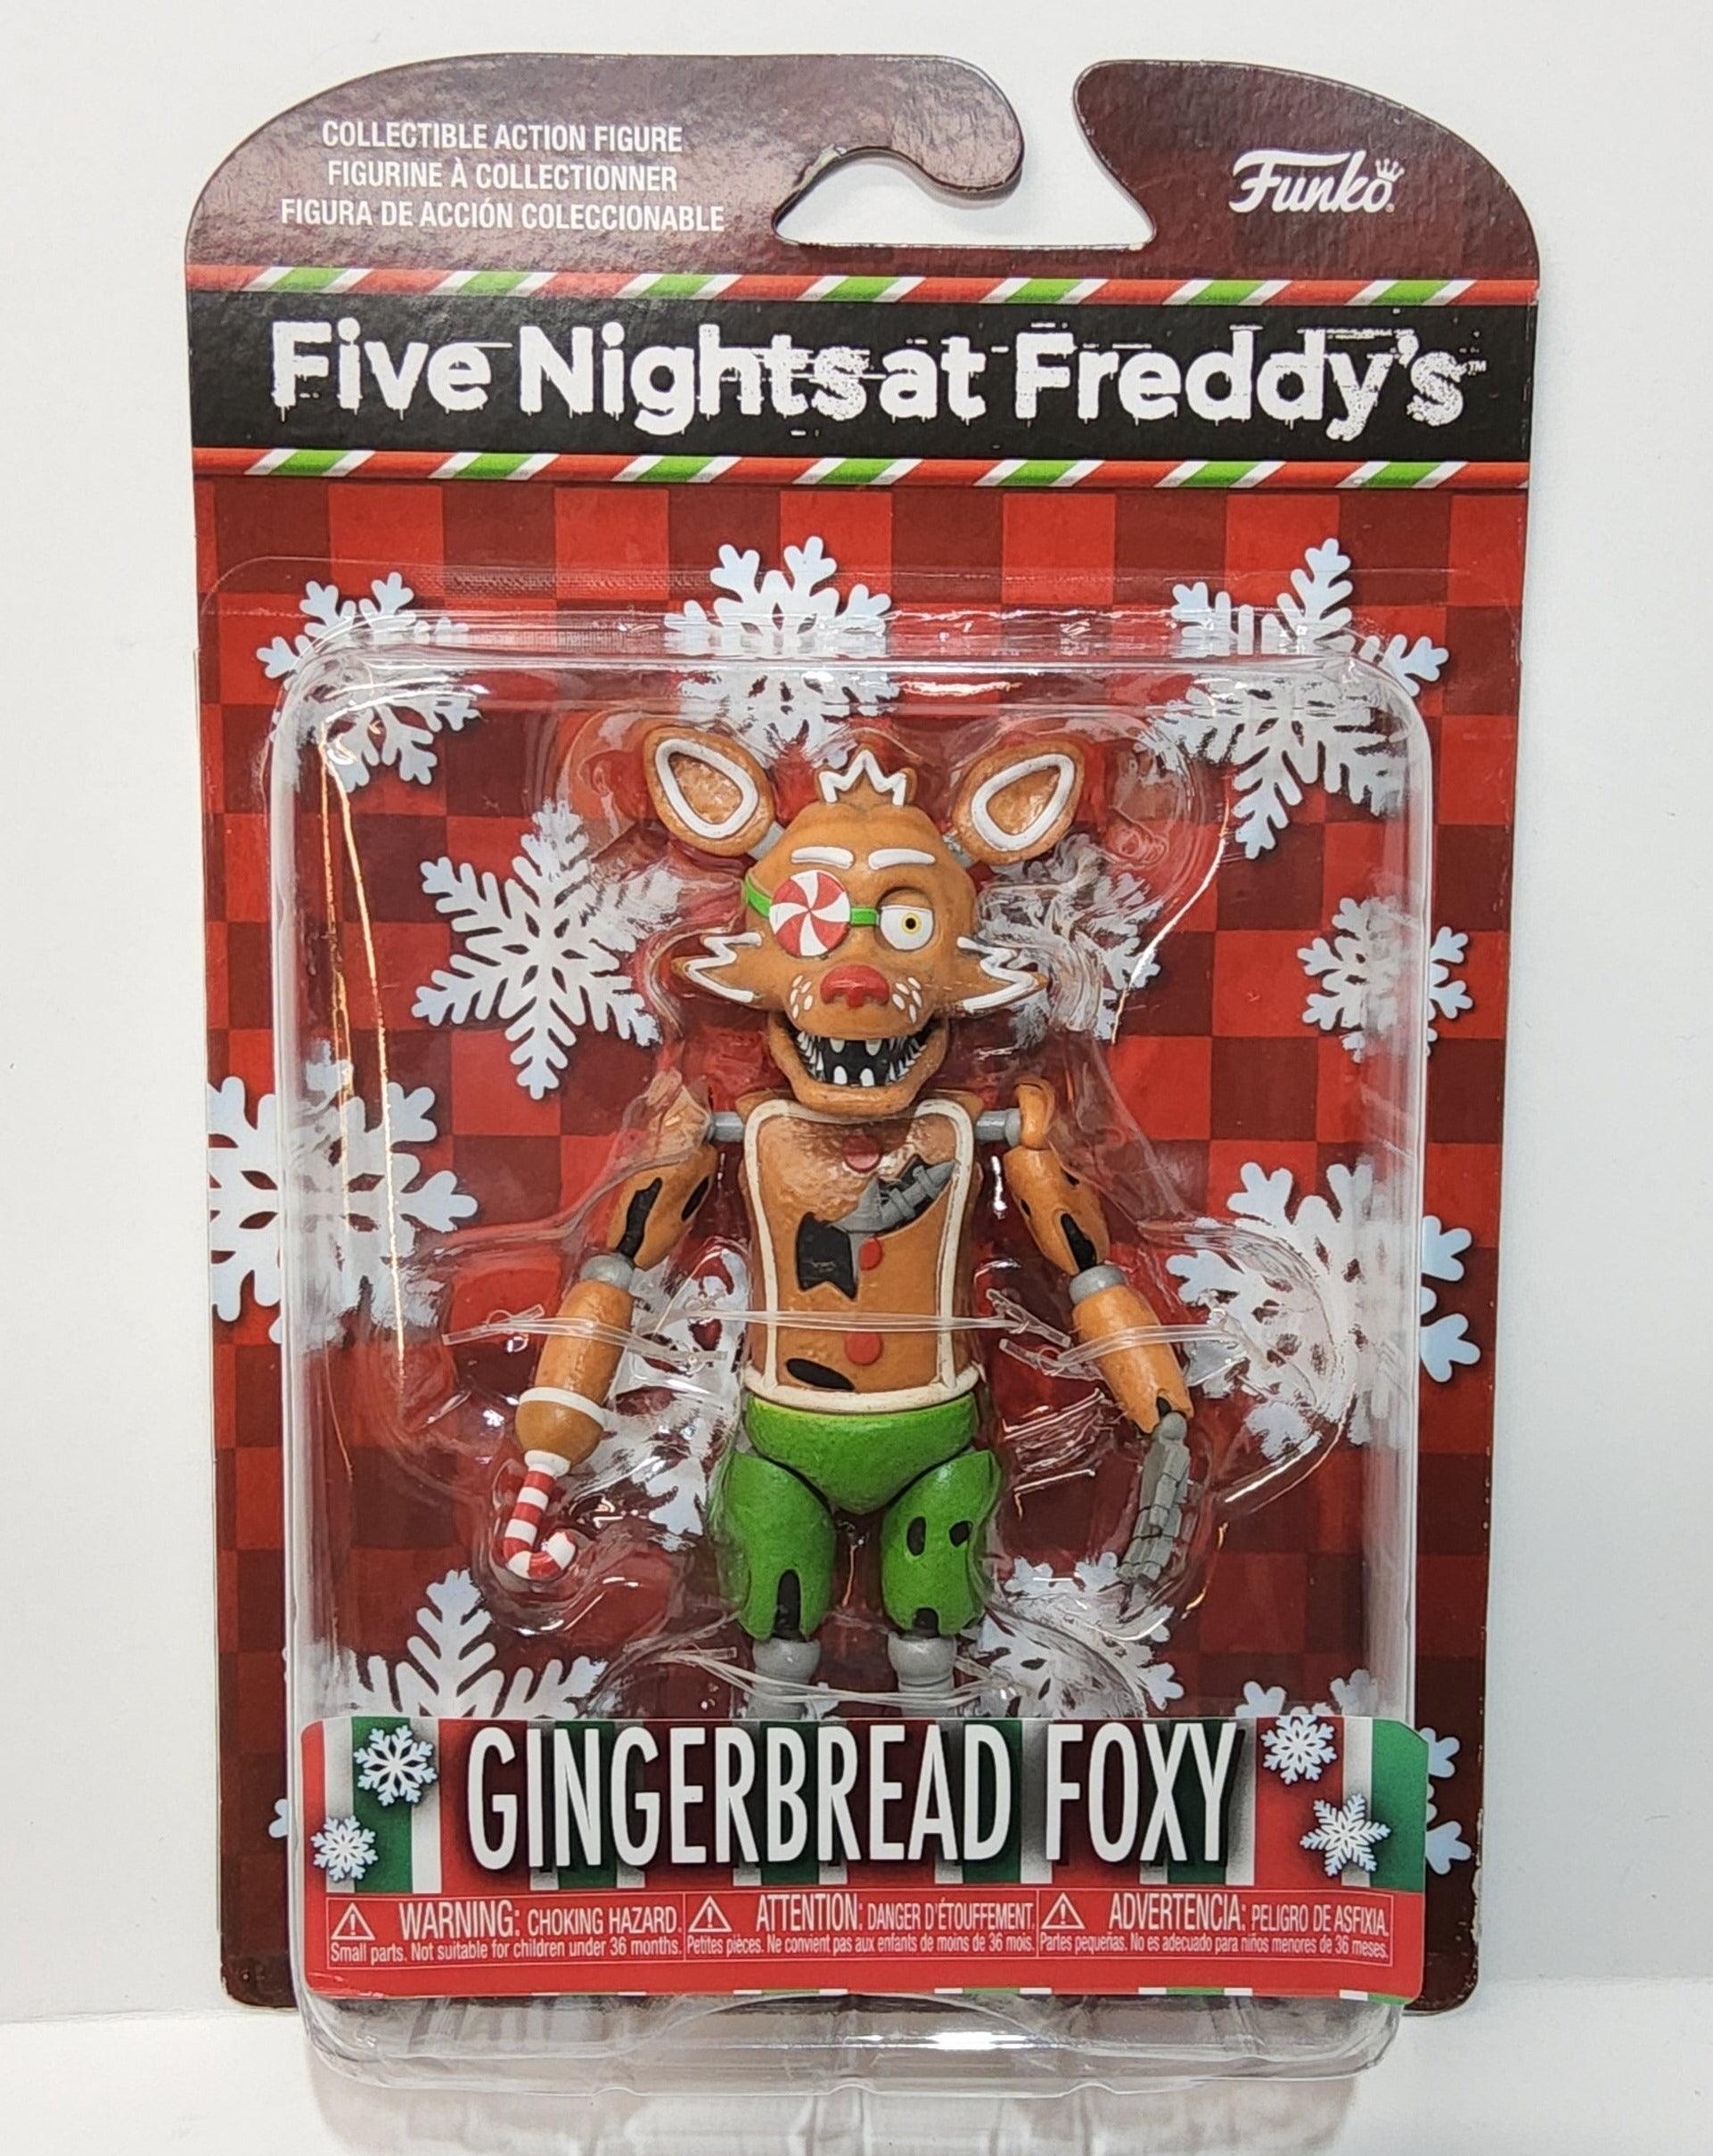 Gingerbread Foxy Action Figure